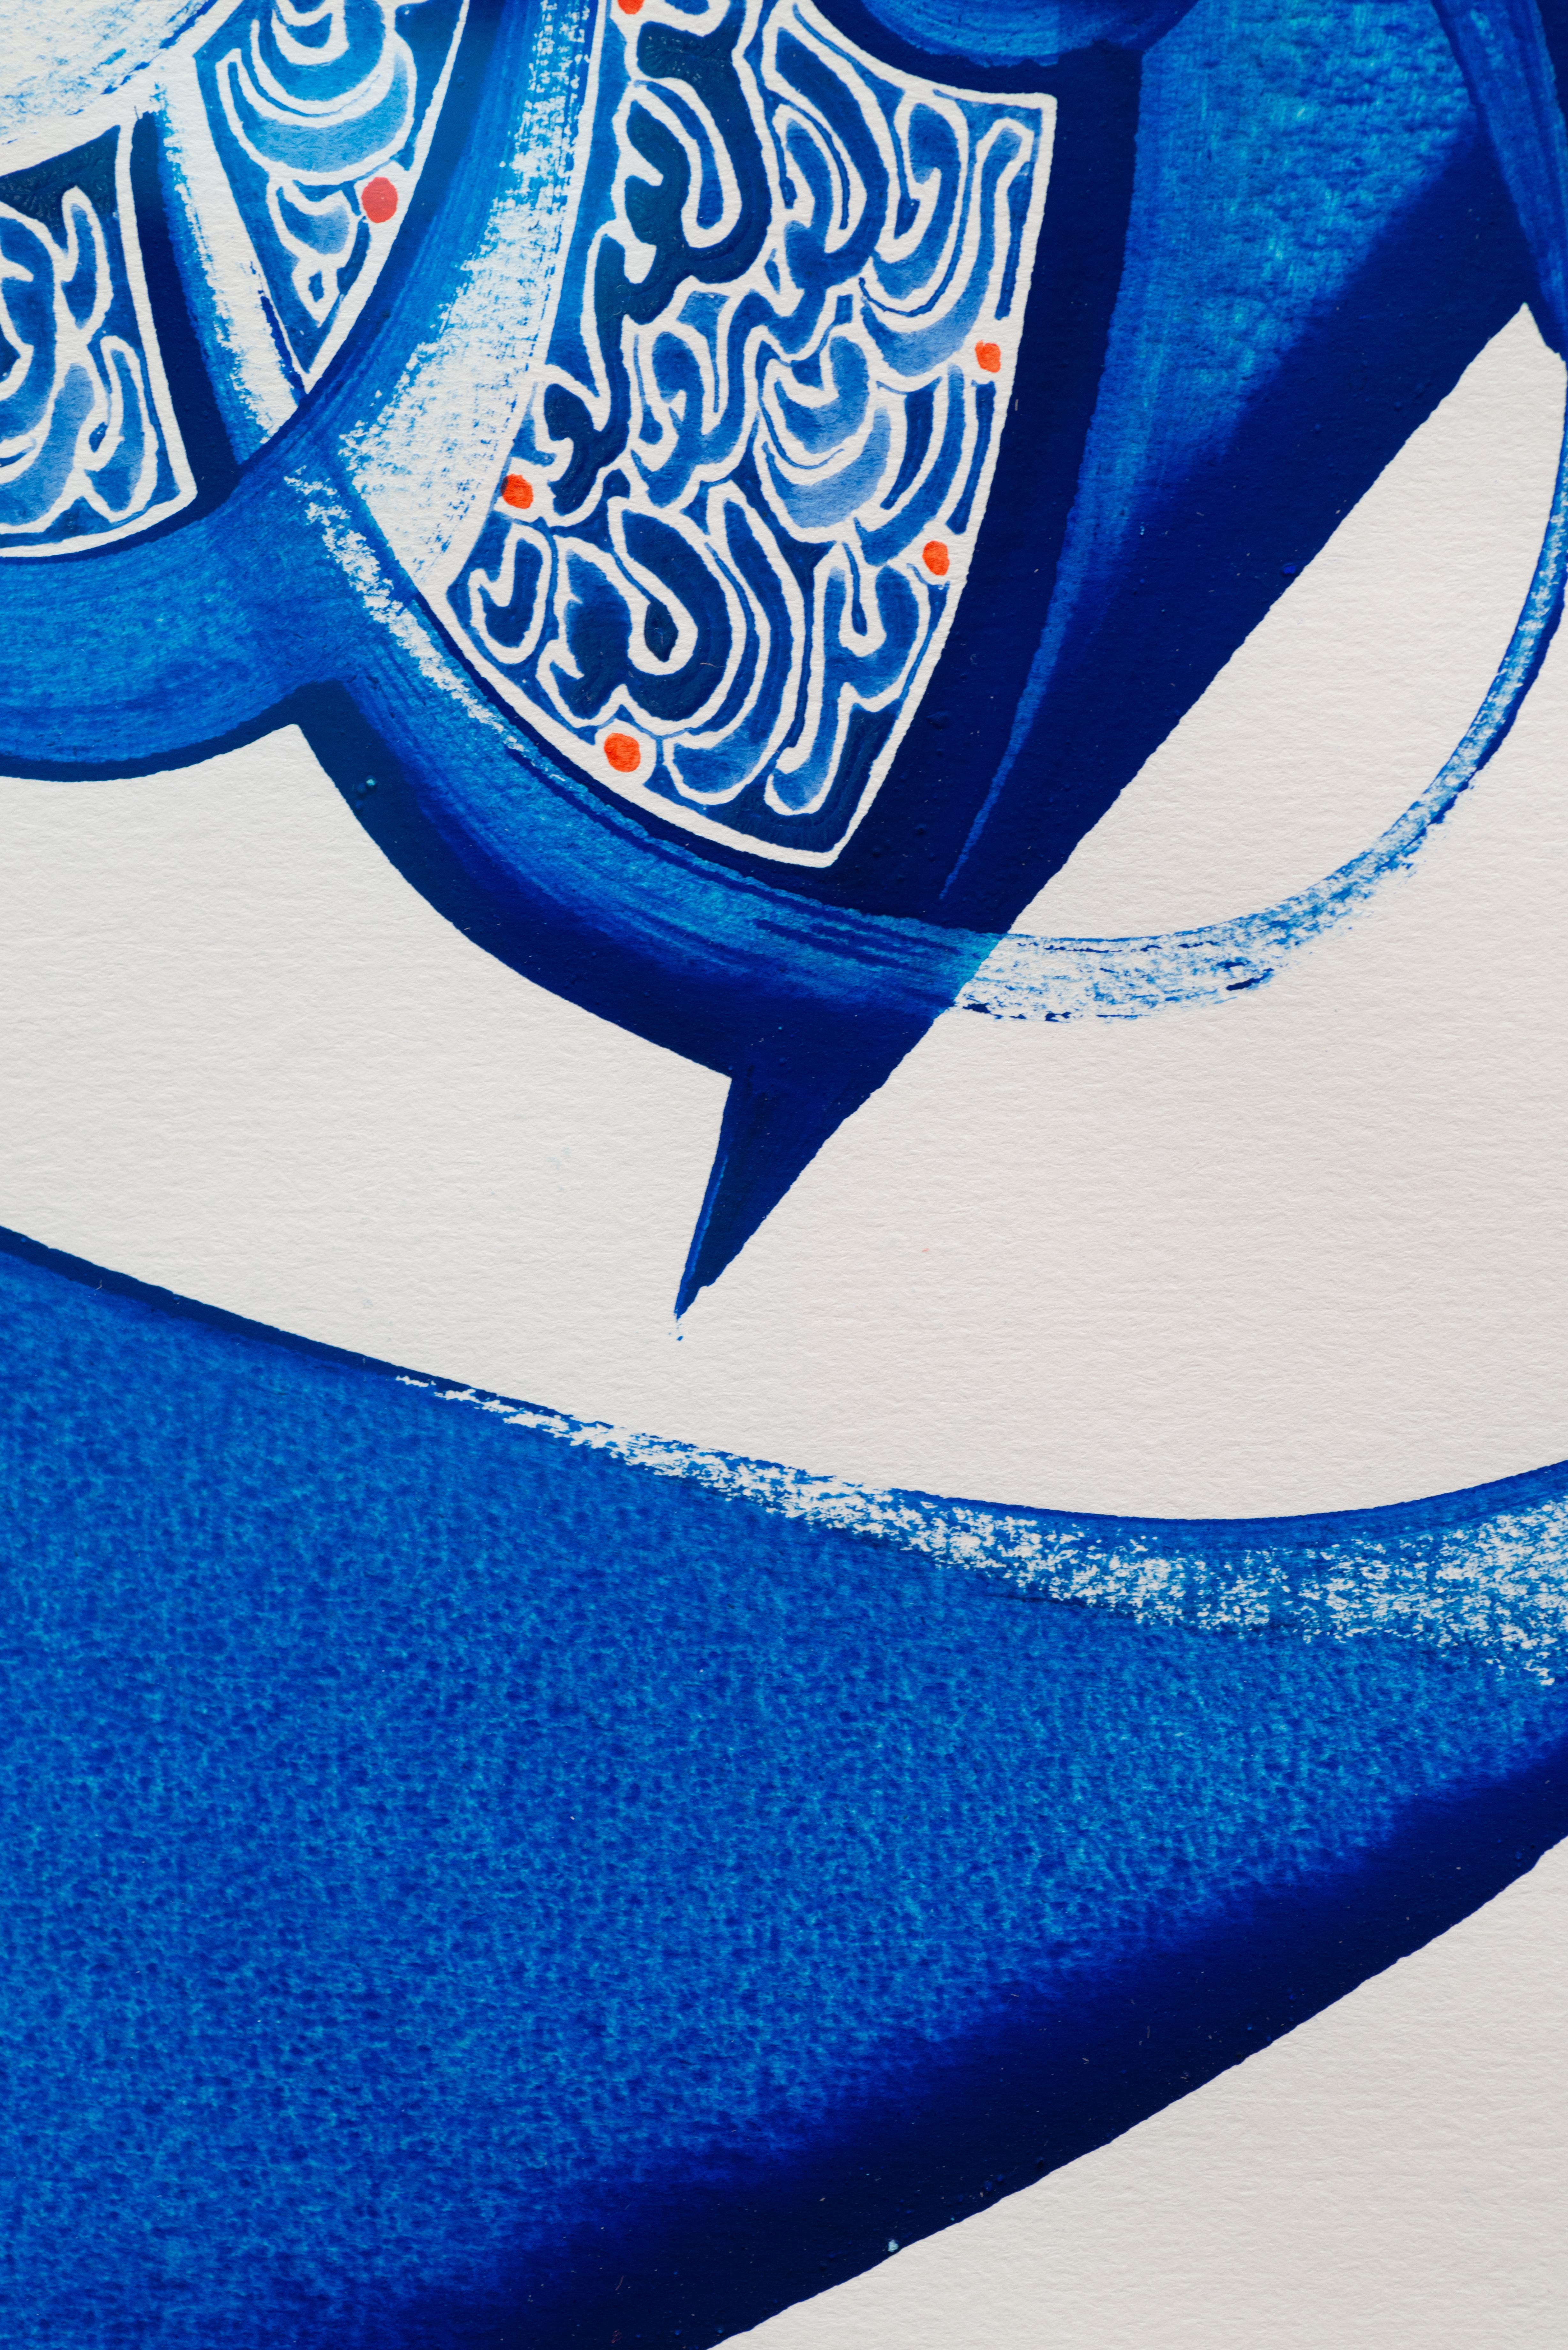 Vibrant blue contemporary Islamic calligraphy on paper - Abstract Expressionist Art by Hassan Massoudy